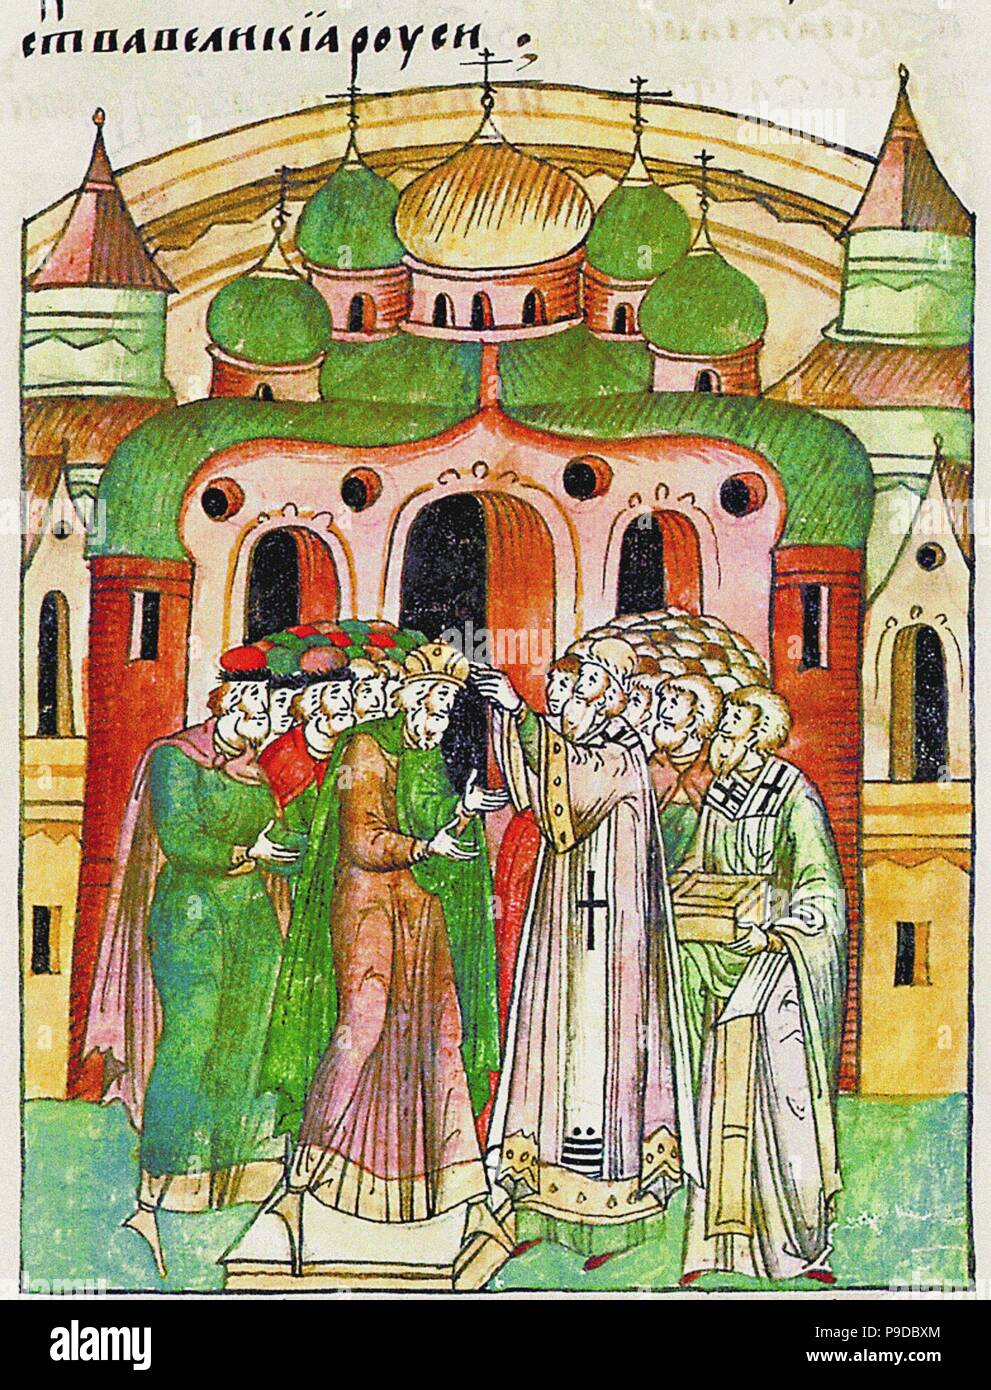 Vladimir Vsevolodovich crowned by Bishop Neophytos with Monomakh's Cap. (From the Illuminated Compiled Chronicle). Museum: Russian National Library, St. Petersburg. Stock Photo